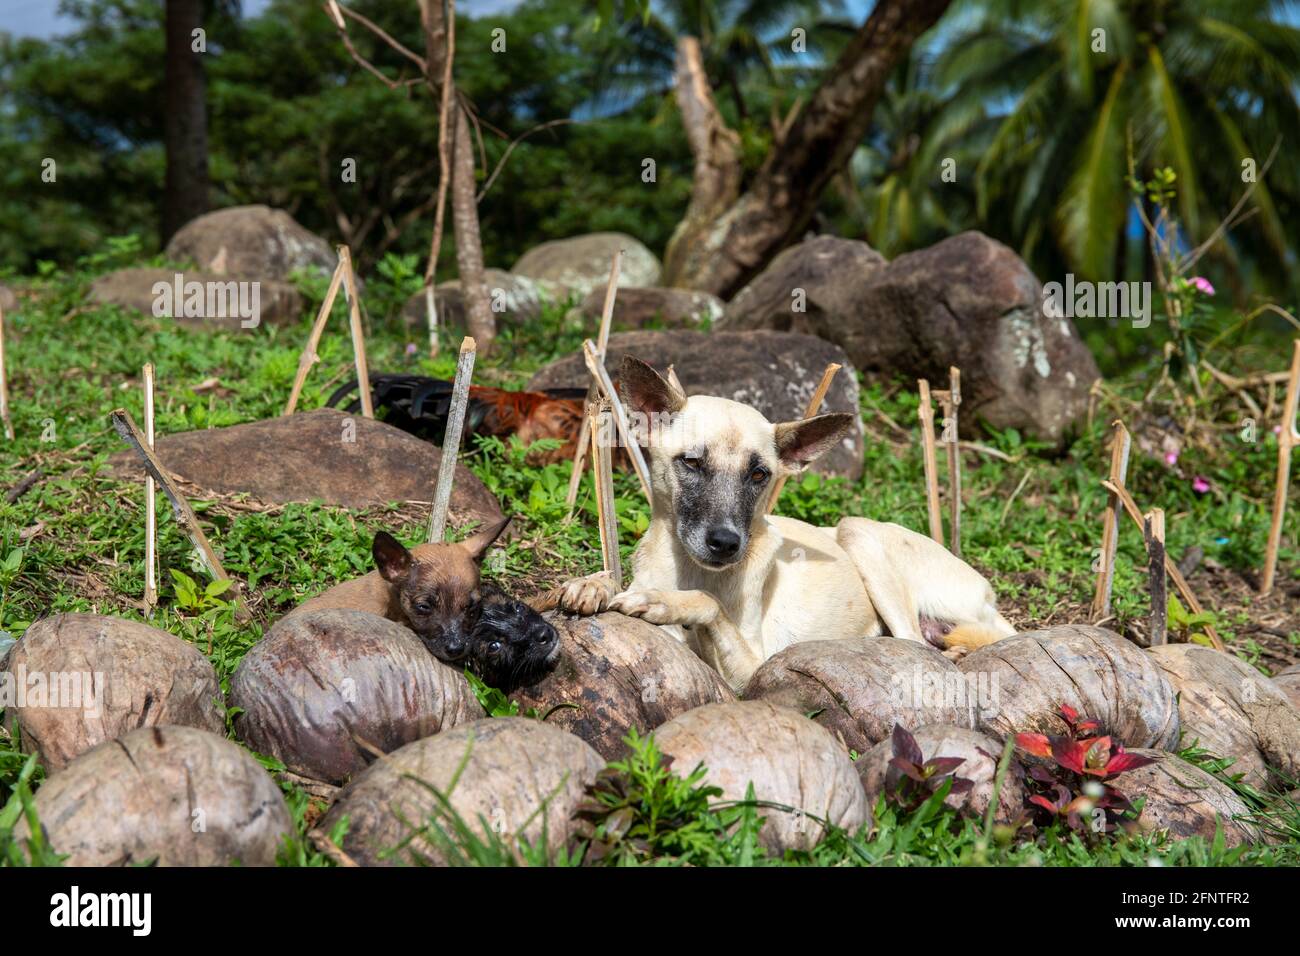 Cute dog mother and her puppy rest on summer grass. Tropical rural land scene. Asian village animals. Dog breed population growth in South Asia. Cute Stock Photo